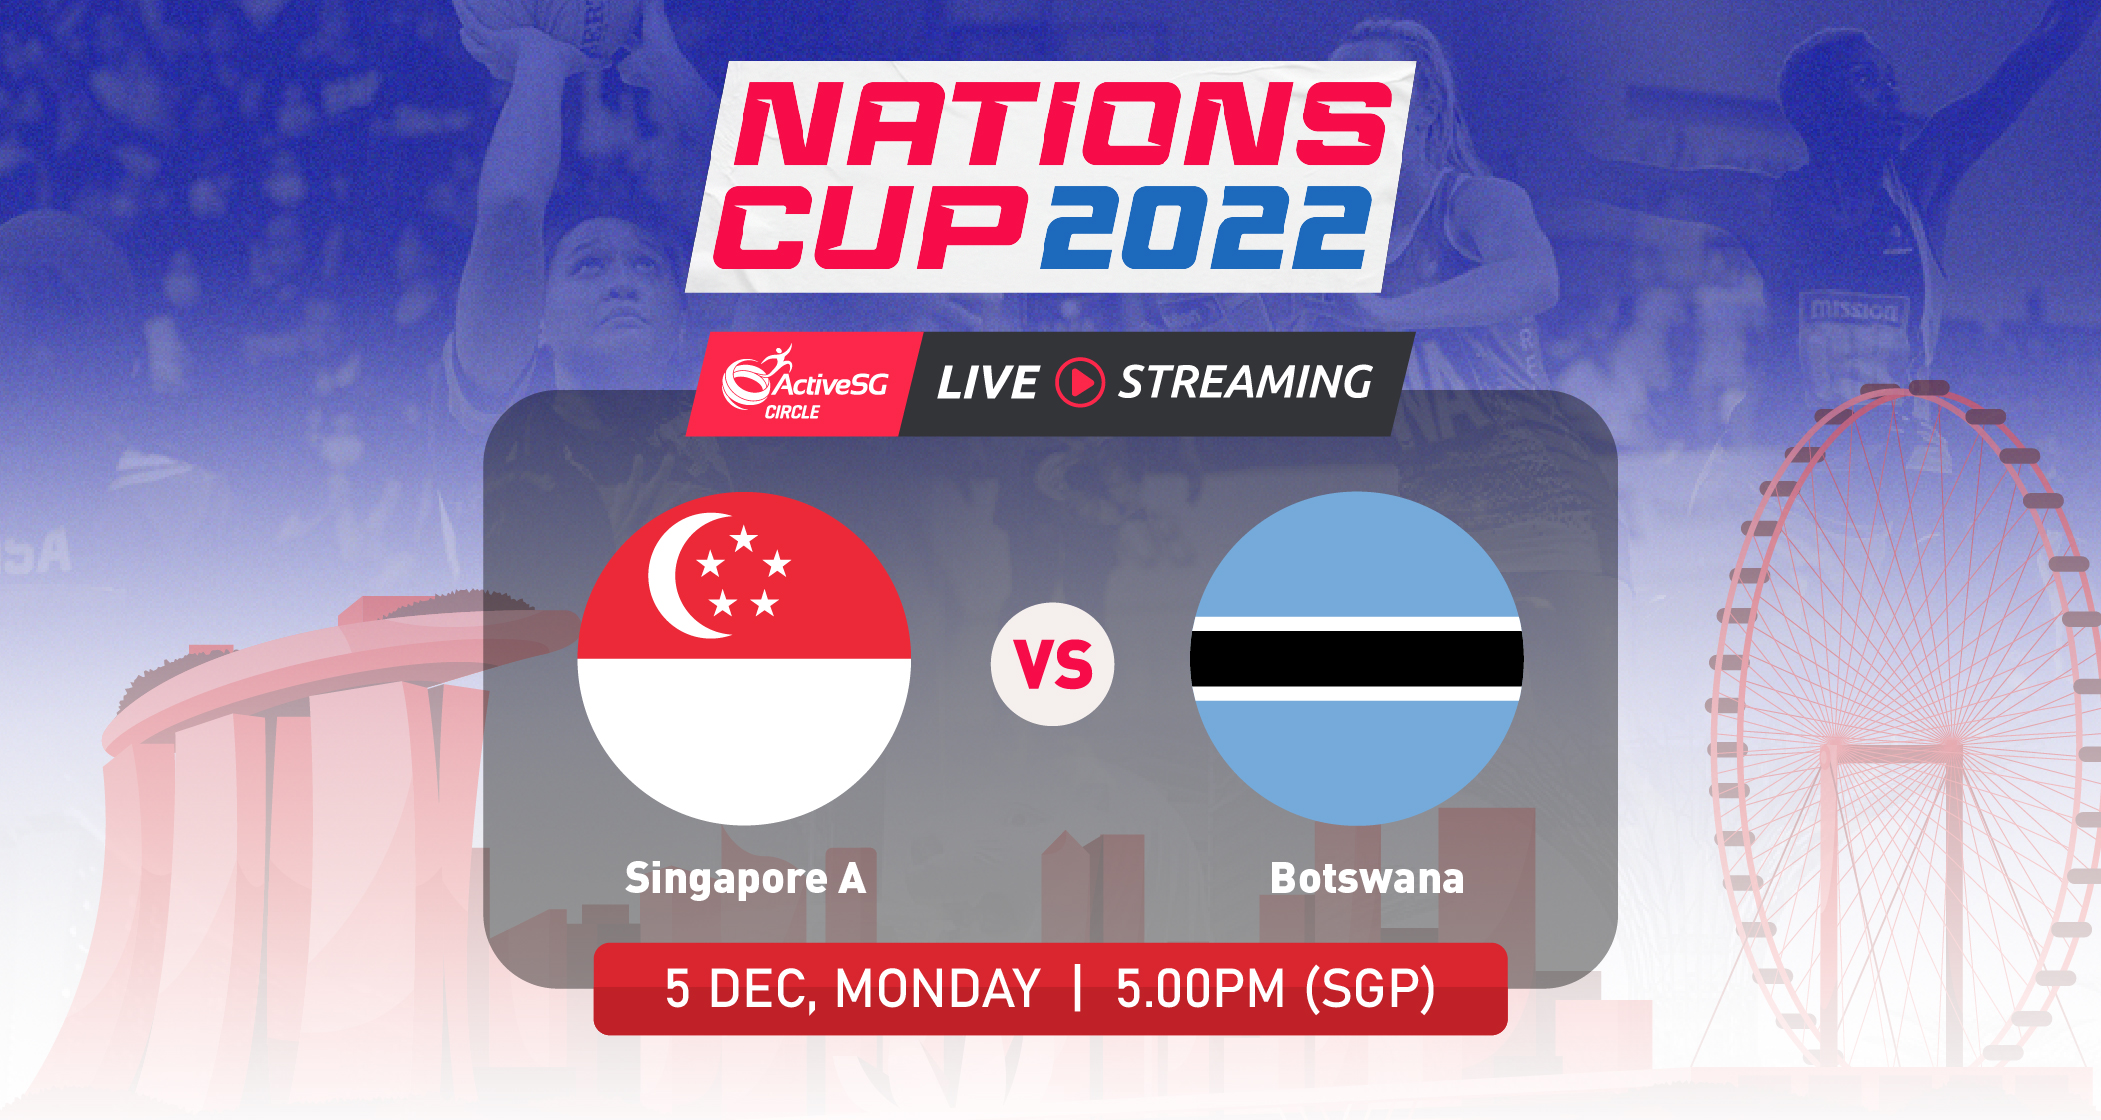 Singapore A 🇸🇬 vs 🇧🇼 Botswana | Nations Cup 2022